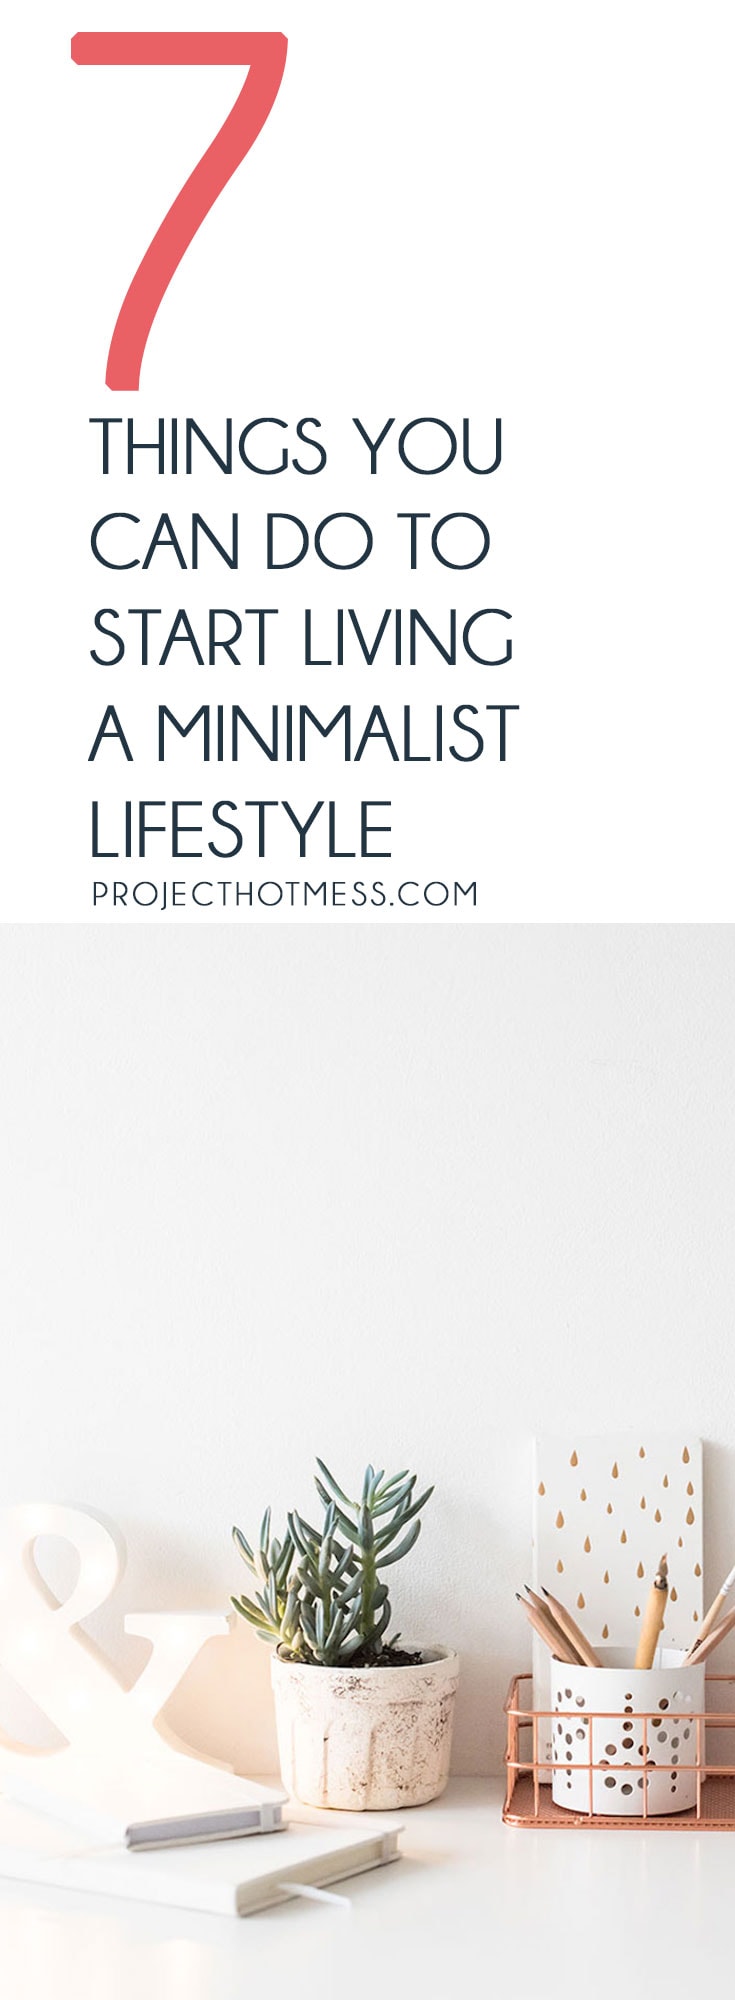 So you've heard the hype and you want to start living a minimalist lifestyle but you don't know where to start? That's okay! It's not as overwhelming as you think. Here are some simple things you can do to start living a minimalist lifestyle today.